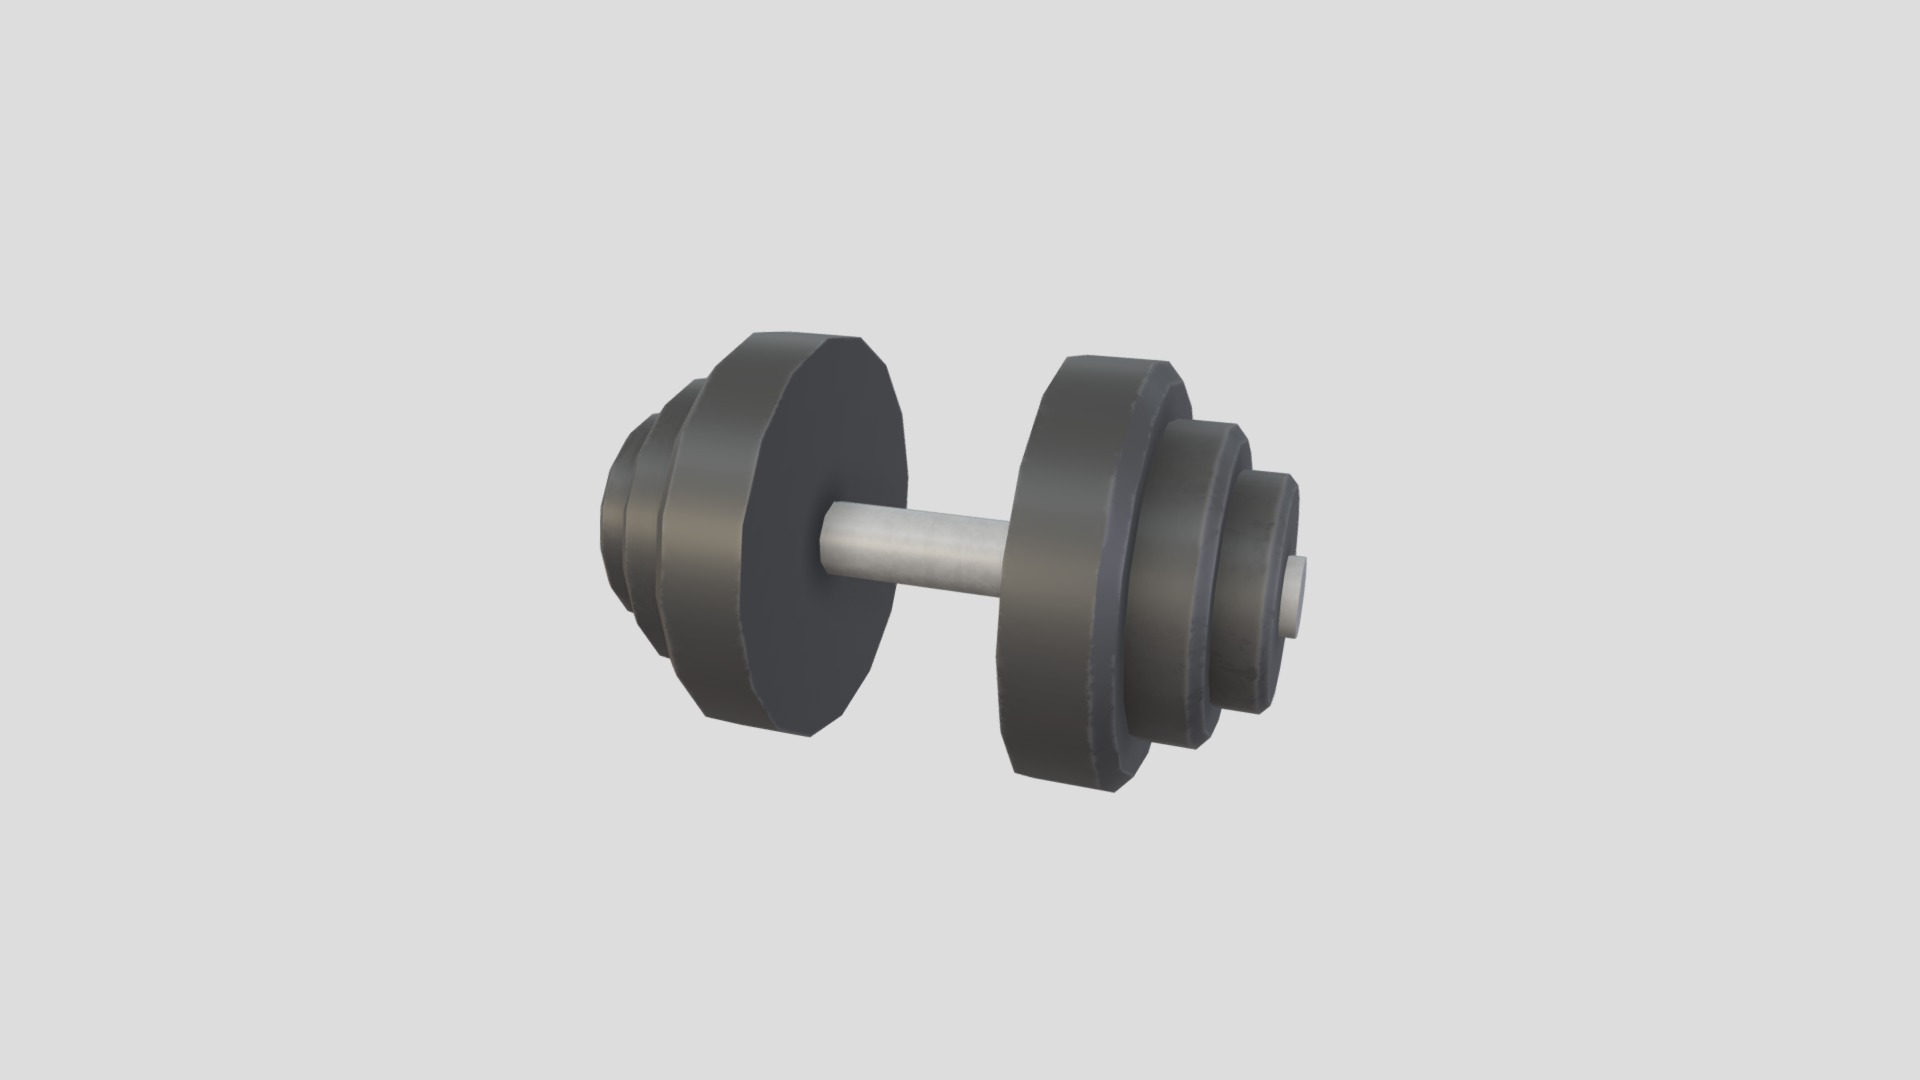 3D model Dumbbell - This is a 3D model of the Dumbbell. The 3D model is about a pair of black headphones.